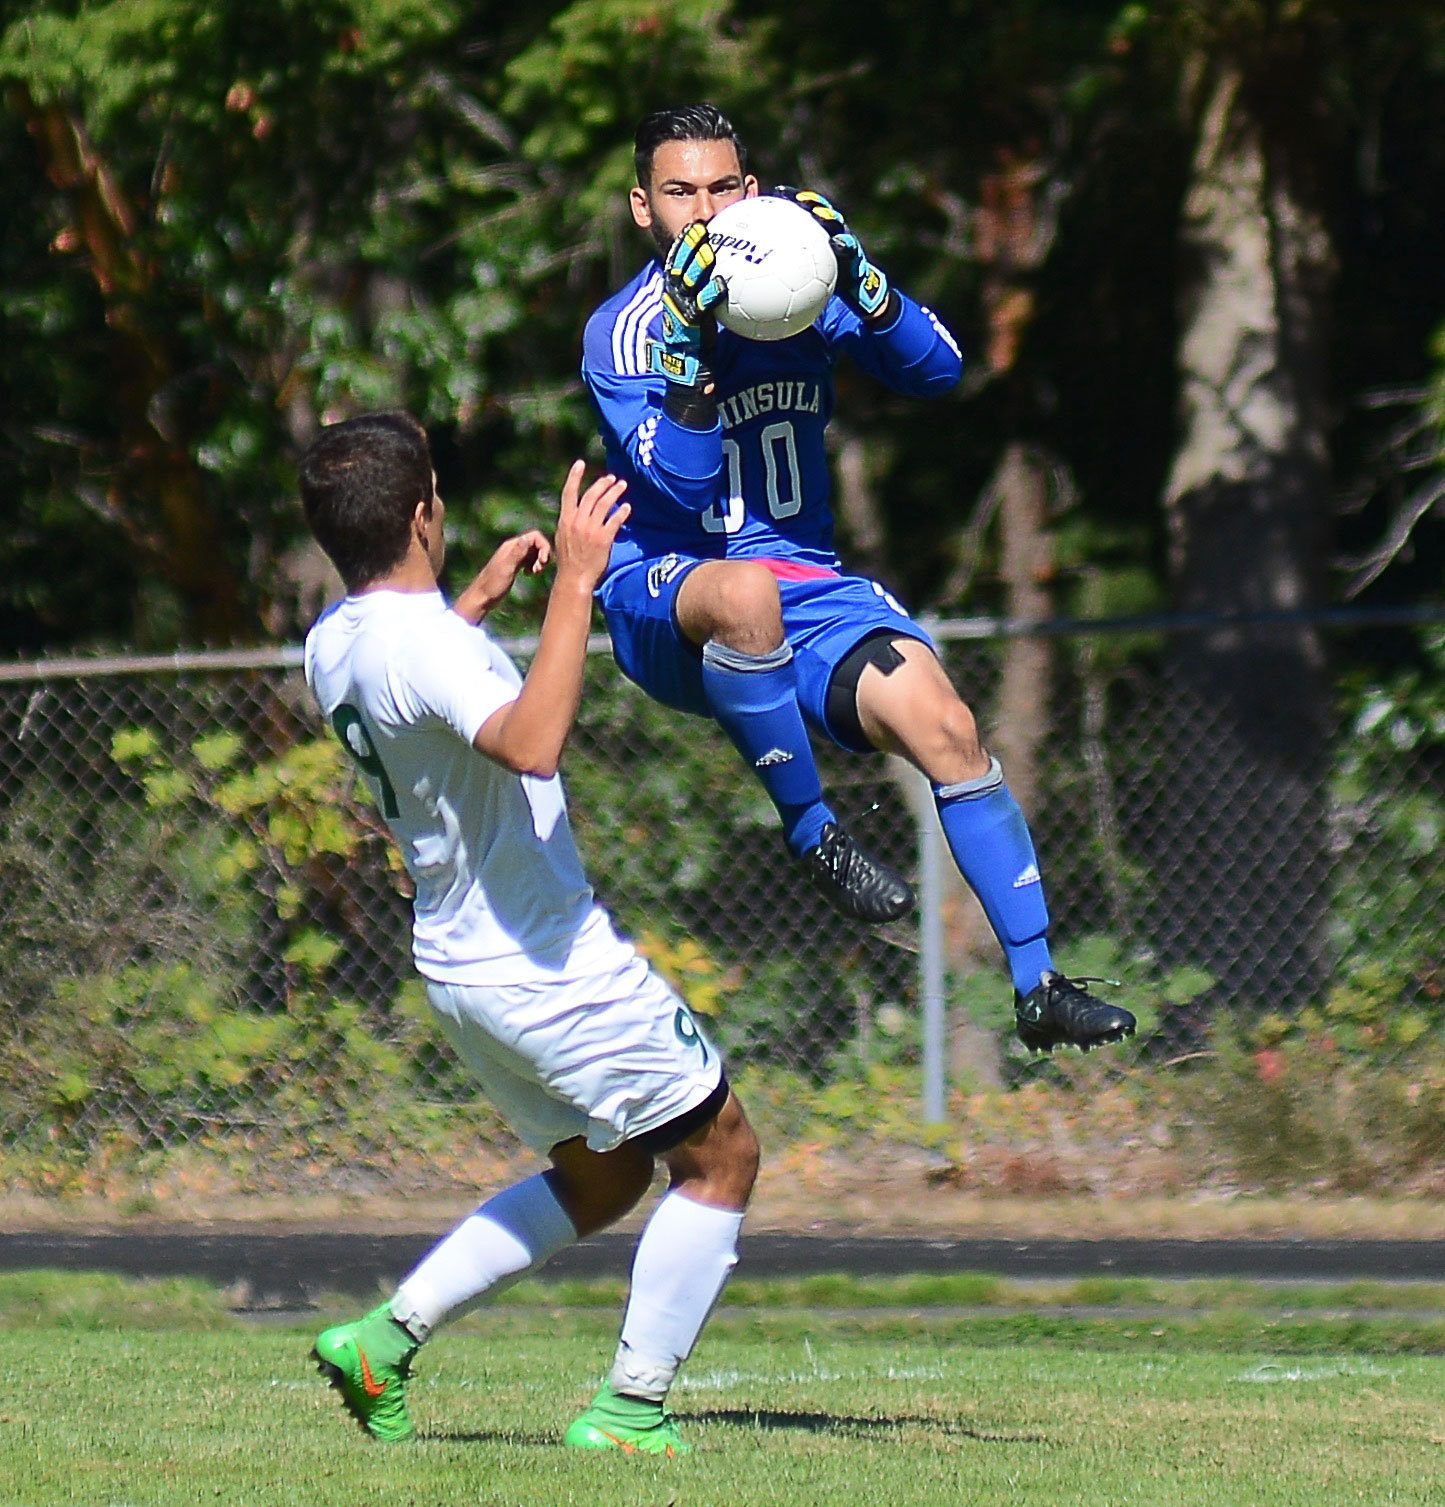 Peninsula goalkeeper Sergio Uribe makes a save in the Pirates' 4-3 win against Shoreline on Sept. 10. Photo by Jay Cline